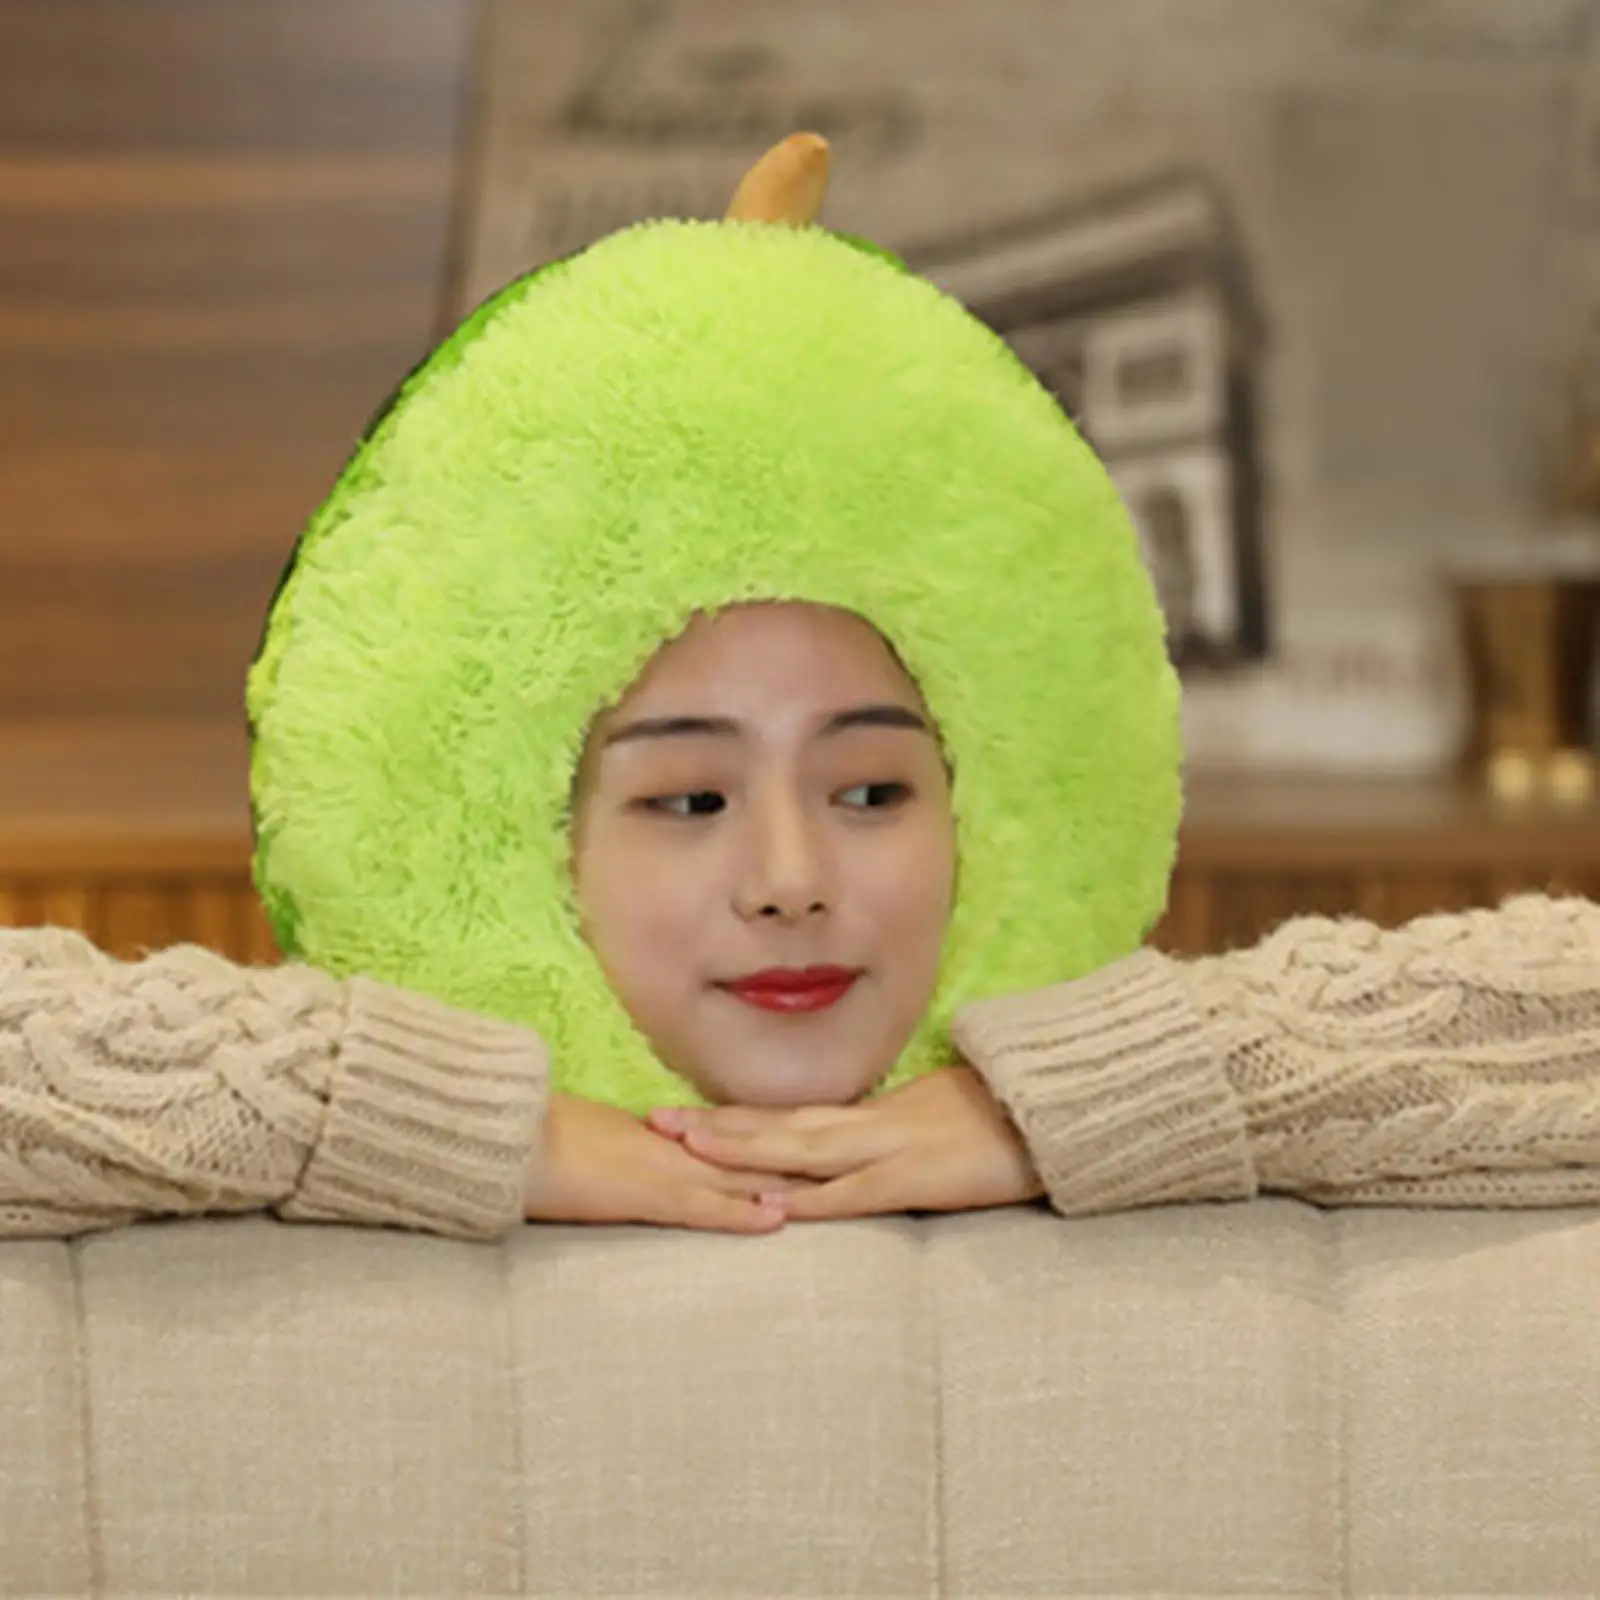 Funny Plush Fruit Headgear Hat Photo Props Stuffed Cap Sleeping Pillow Toy Cosplay Costume Accessory for Birthday Dress up Girls